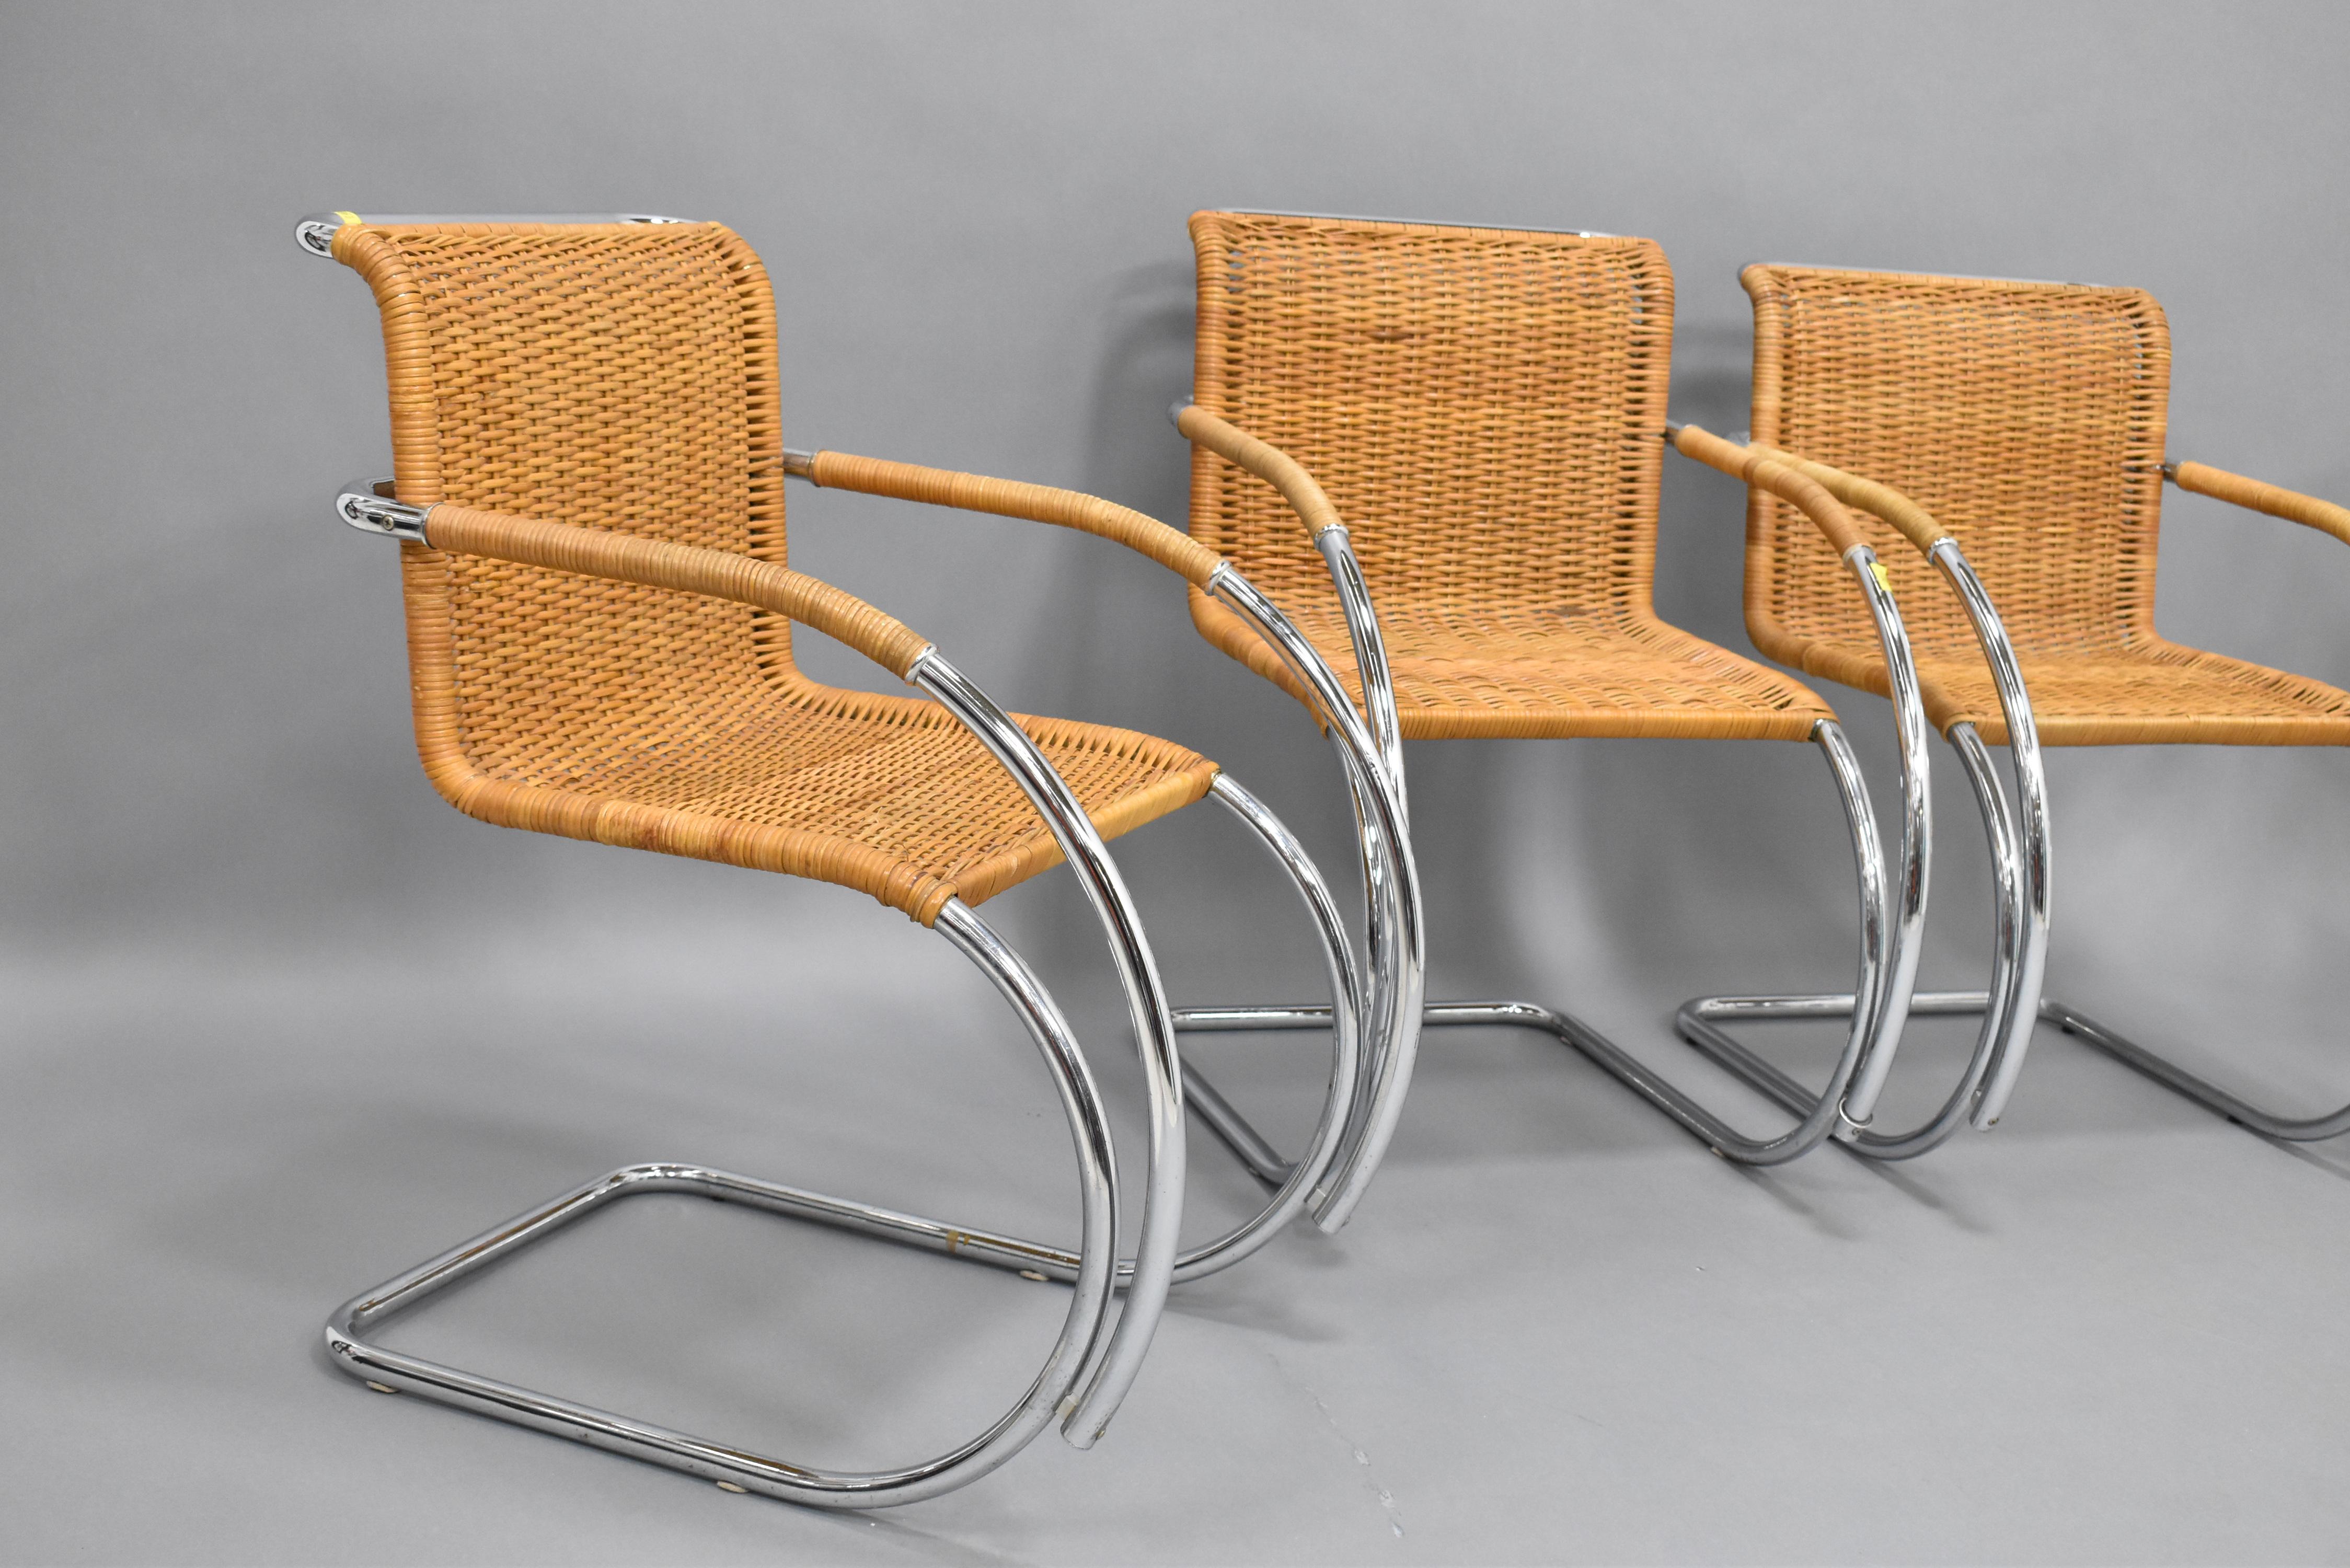 Beautiful set of (4) Mies Van Der Rohe MR20 armchairs. A wonderful and iconic set of chairs originally designed by Van Der Rohe in 1927, this particular set is believed to be produced in the 60s. The chairs feature a beautiful wicker rattan seat and